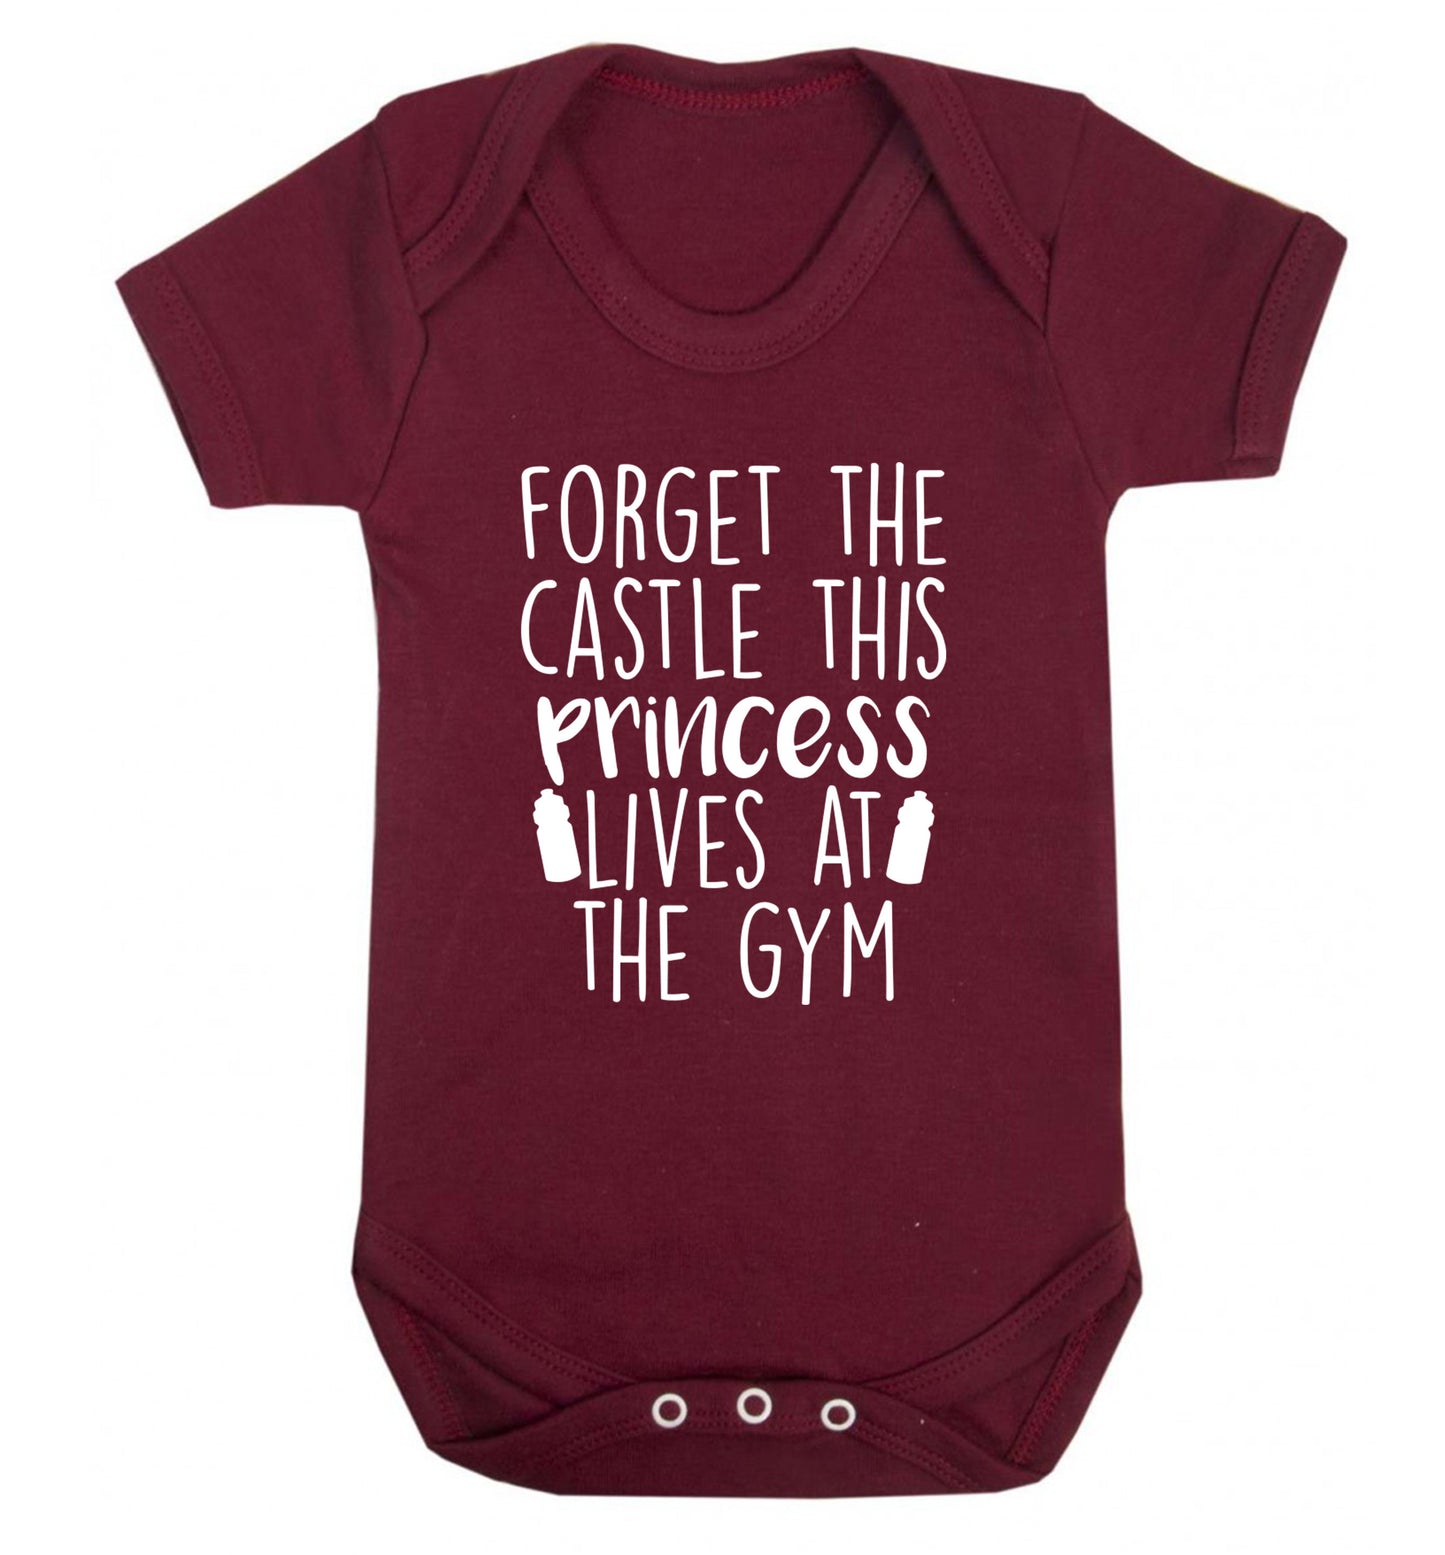 Forget the castle this princess lives at the gym Baby Vest maroon 18-24 months